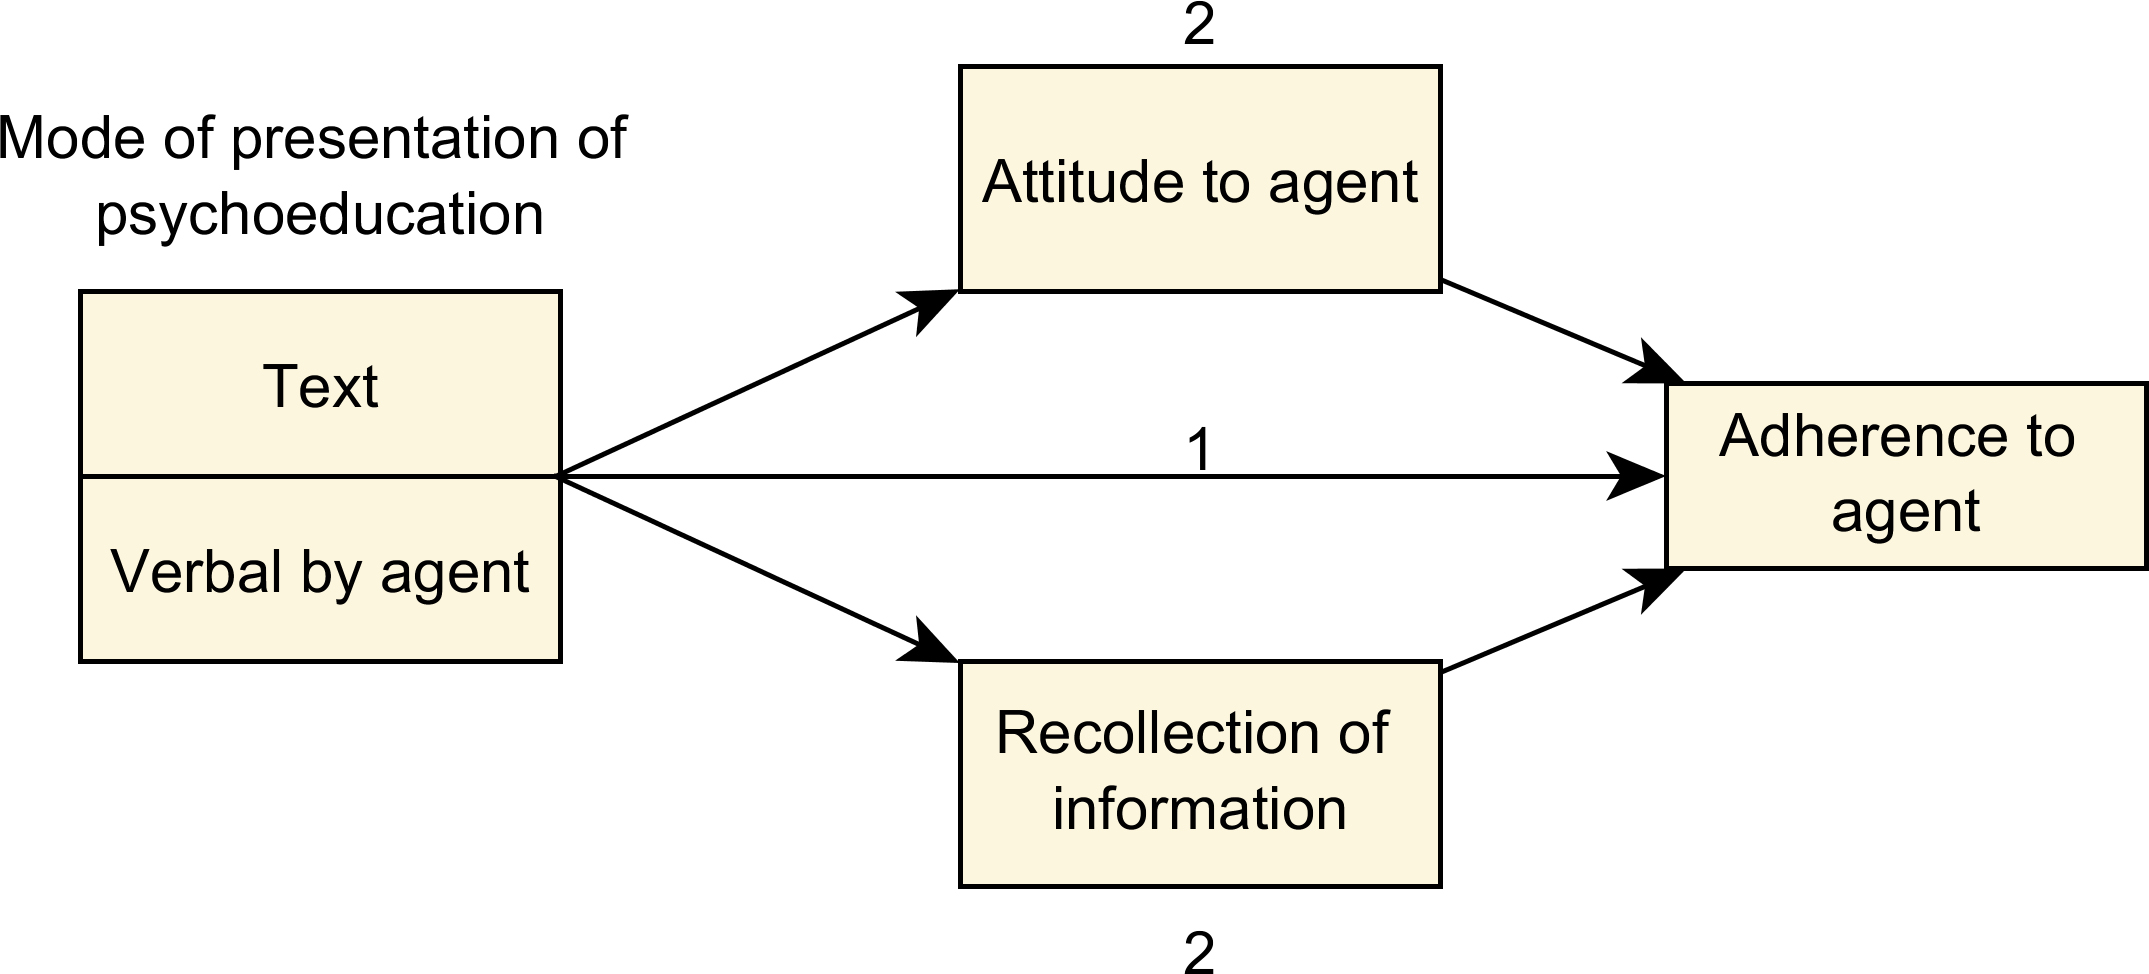 Hypotheses on how mode of presentation will influence adherence via the mediators of attitude towards the virtual agent and recollection of the information.